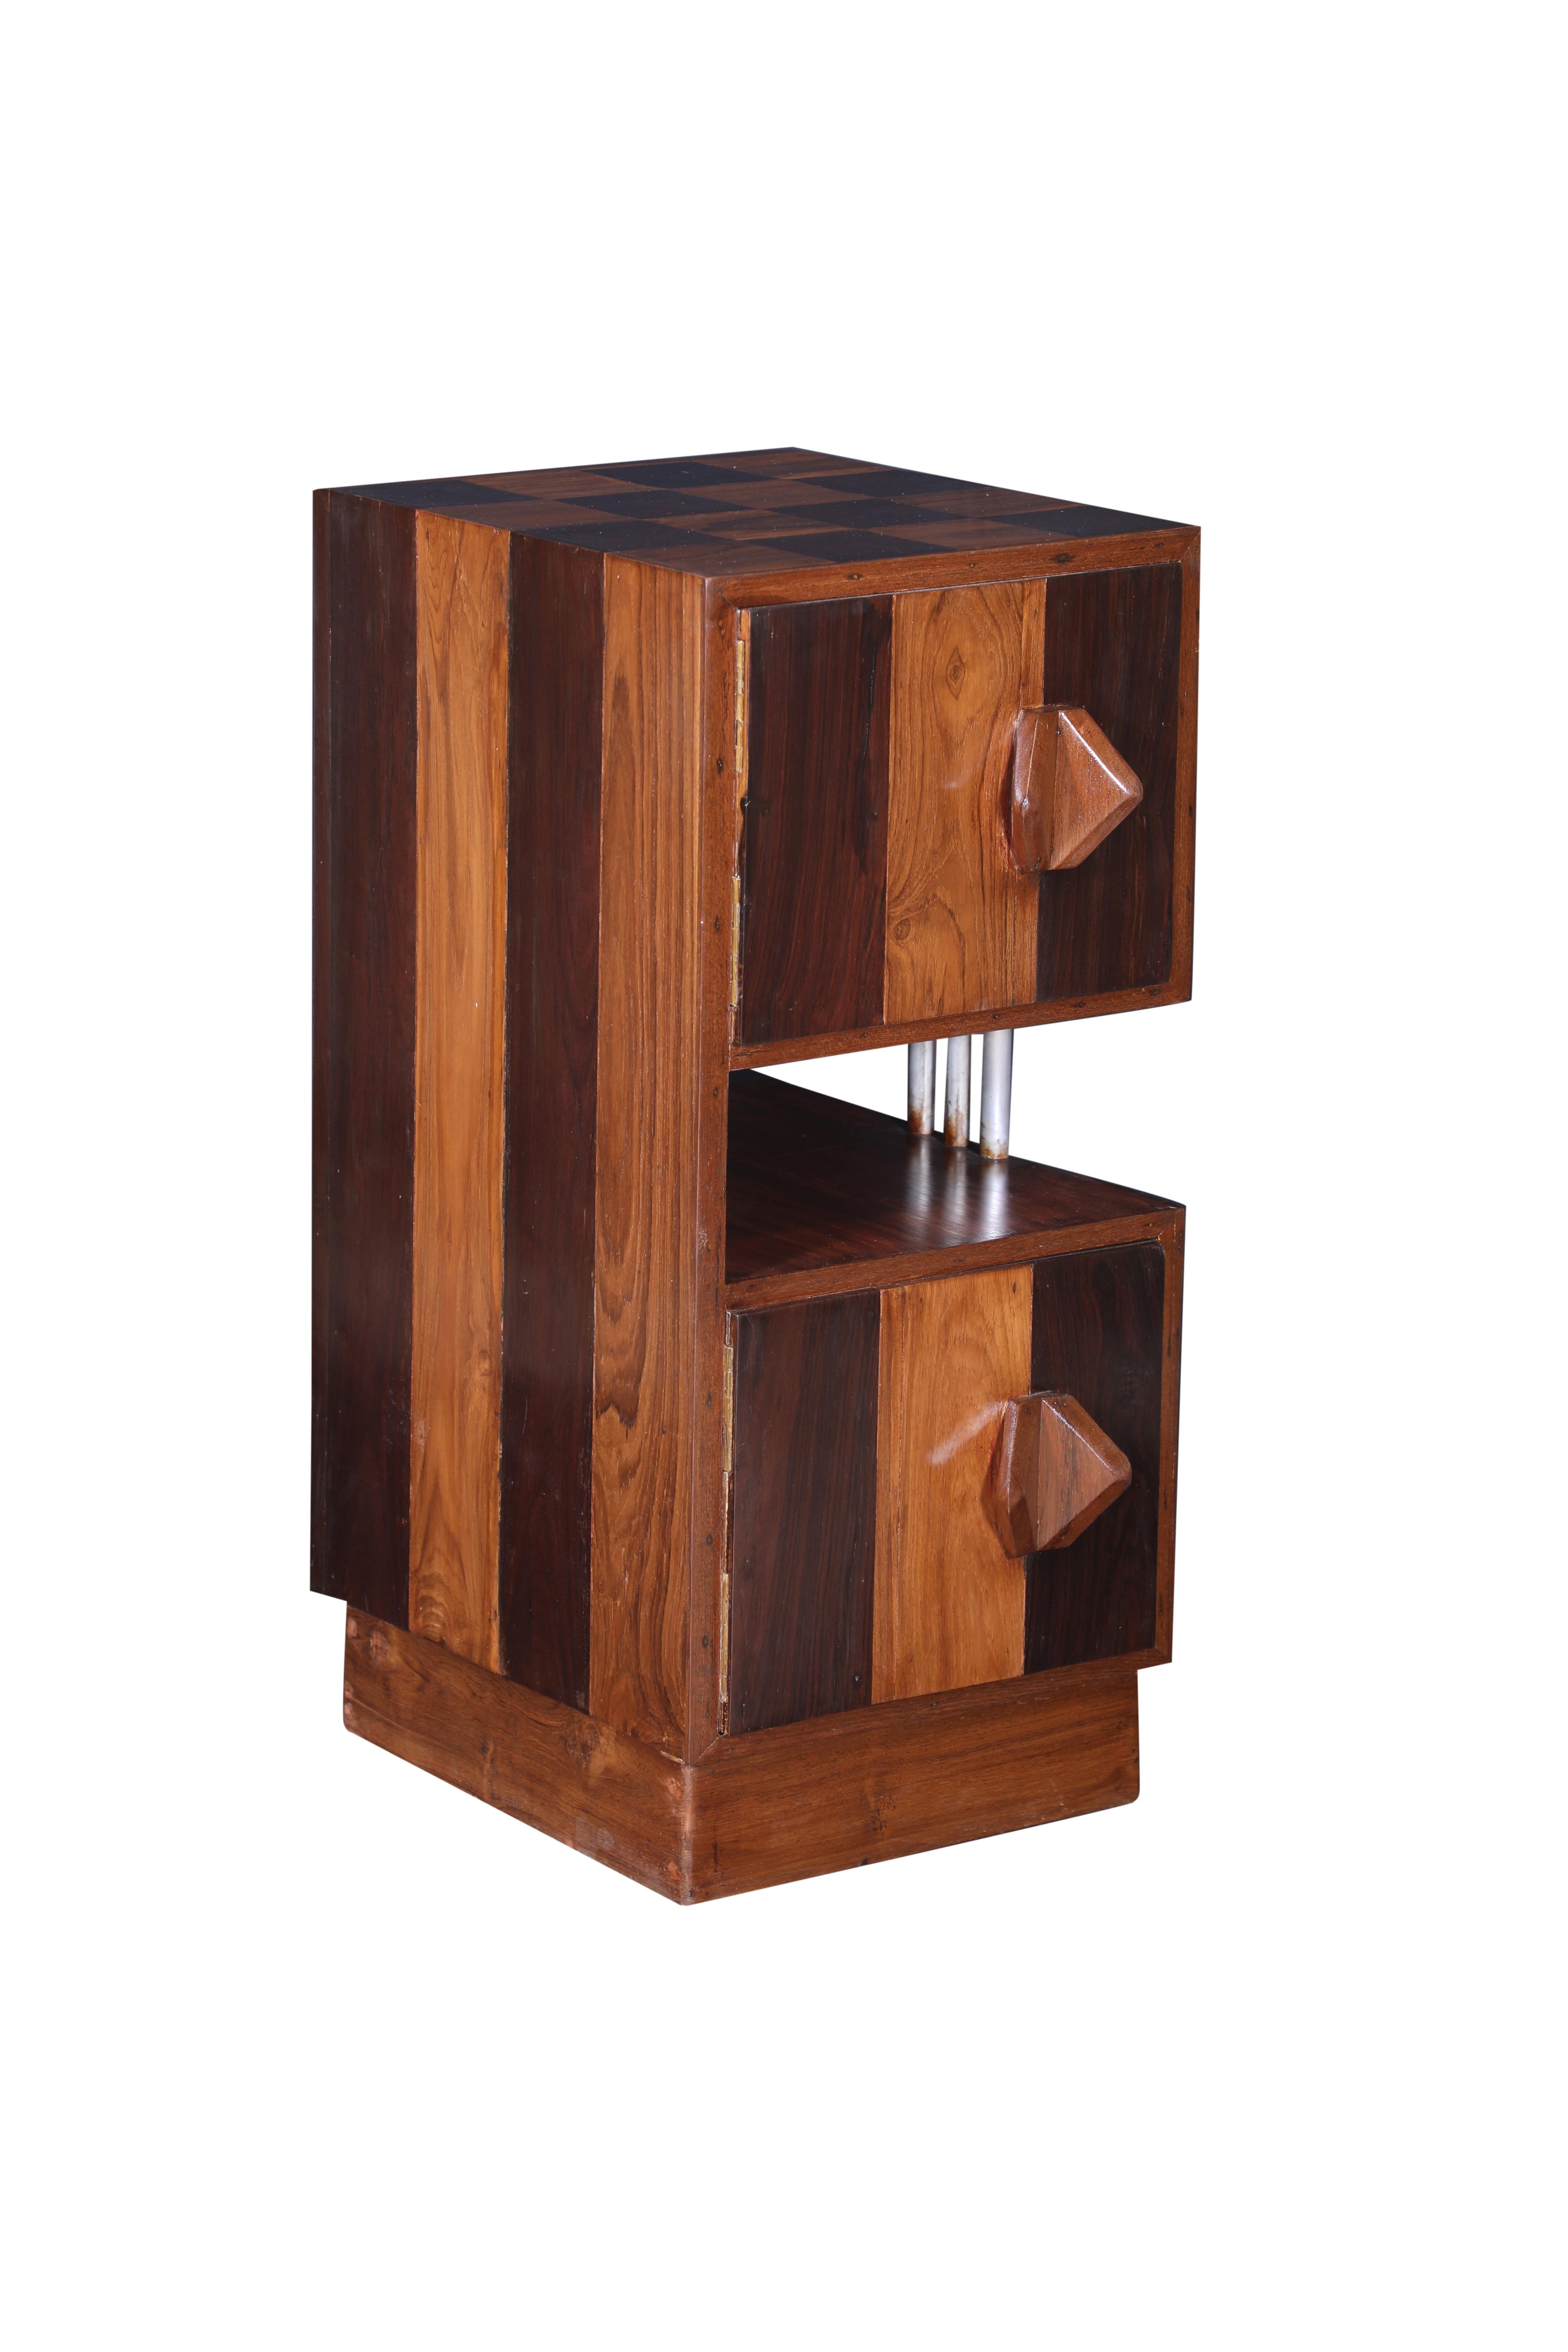 Mid Century Modern teak and rosewood side or end table cabinet.  It features a striped pattern along the sides and a checker board pattern on the top.  The two cabinet doors have butterfly shaped door pulls and chrome bar accents create the shelf